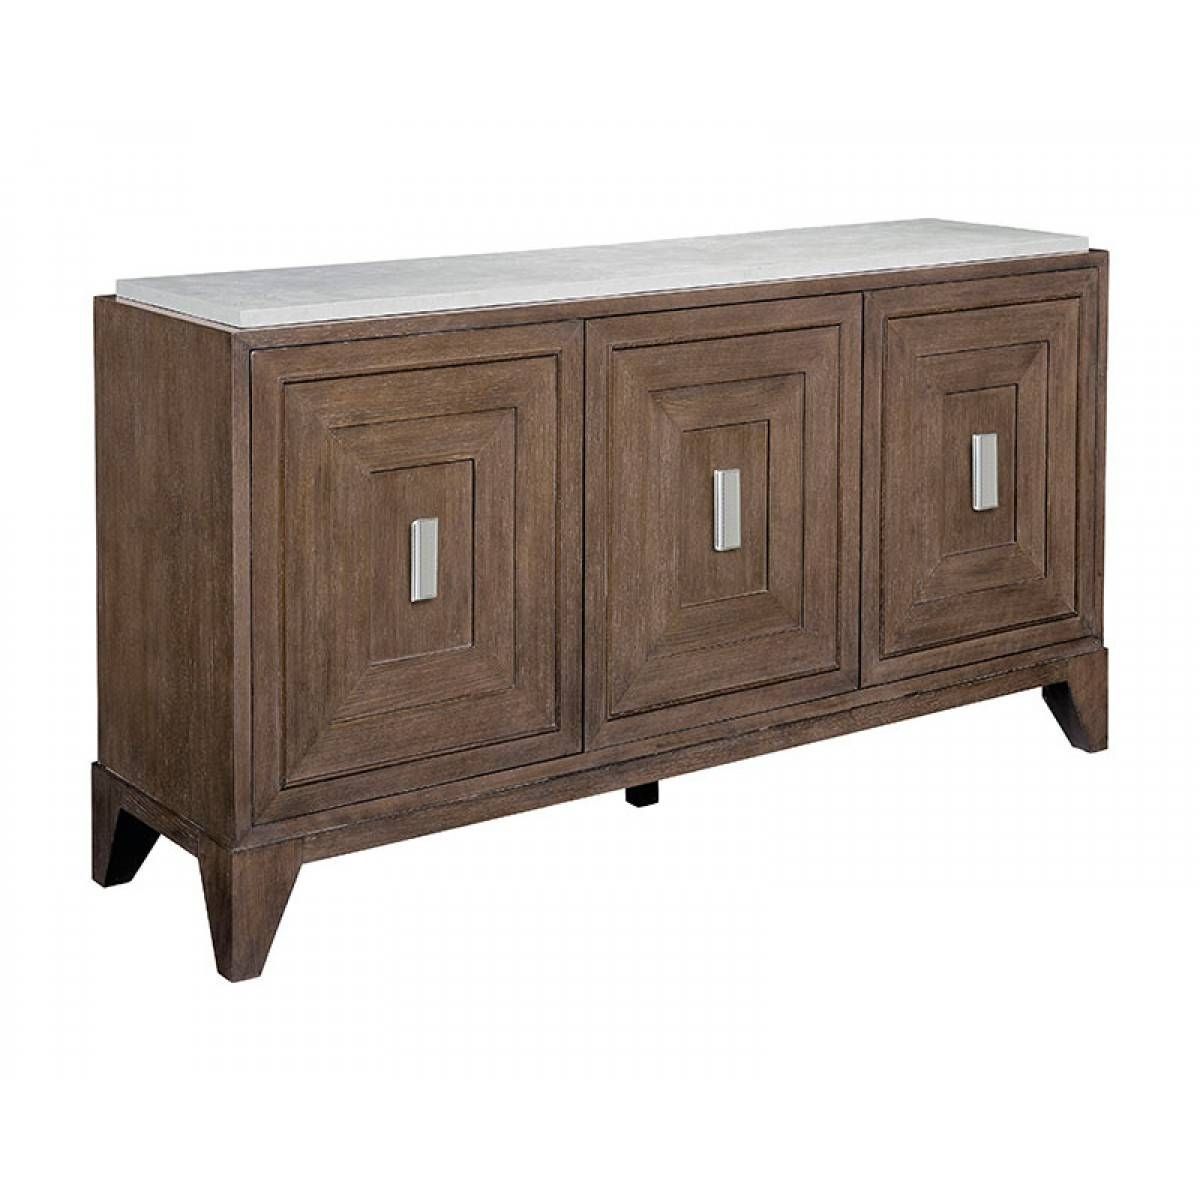 Anthony Baratta Crawford Sideboard For Most Current Thomasville Sideboards (View 9 of 15)